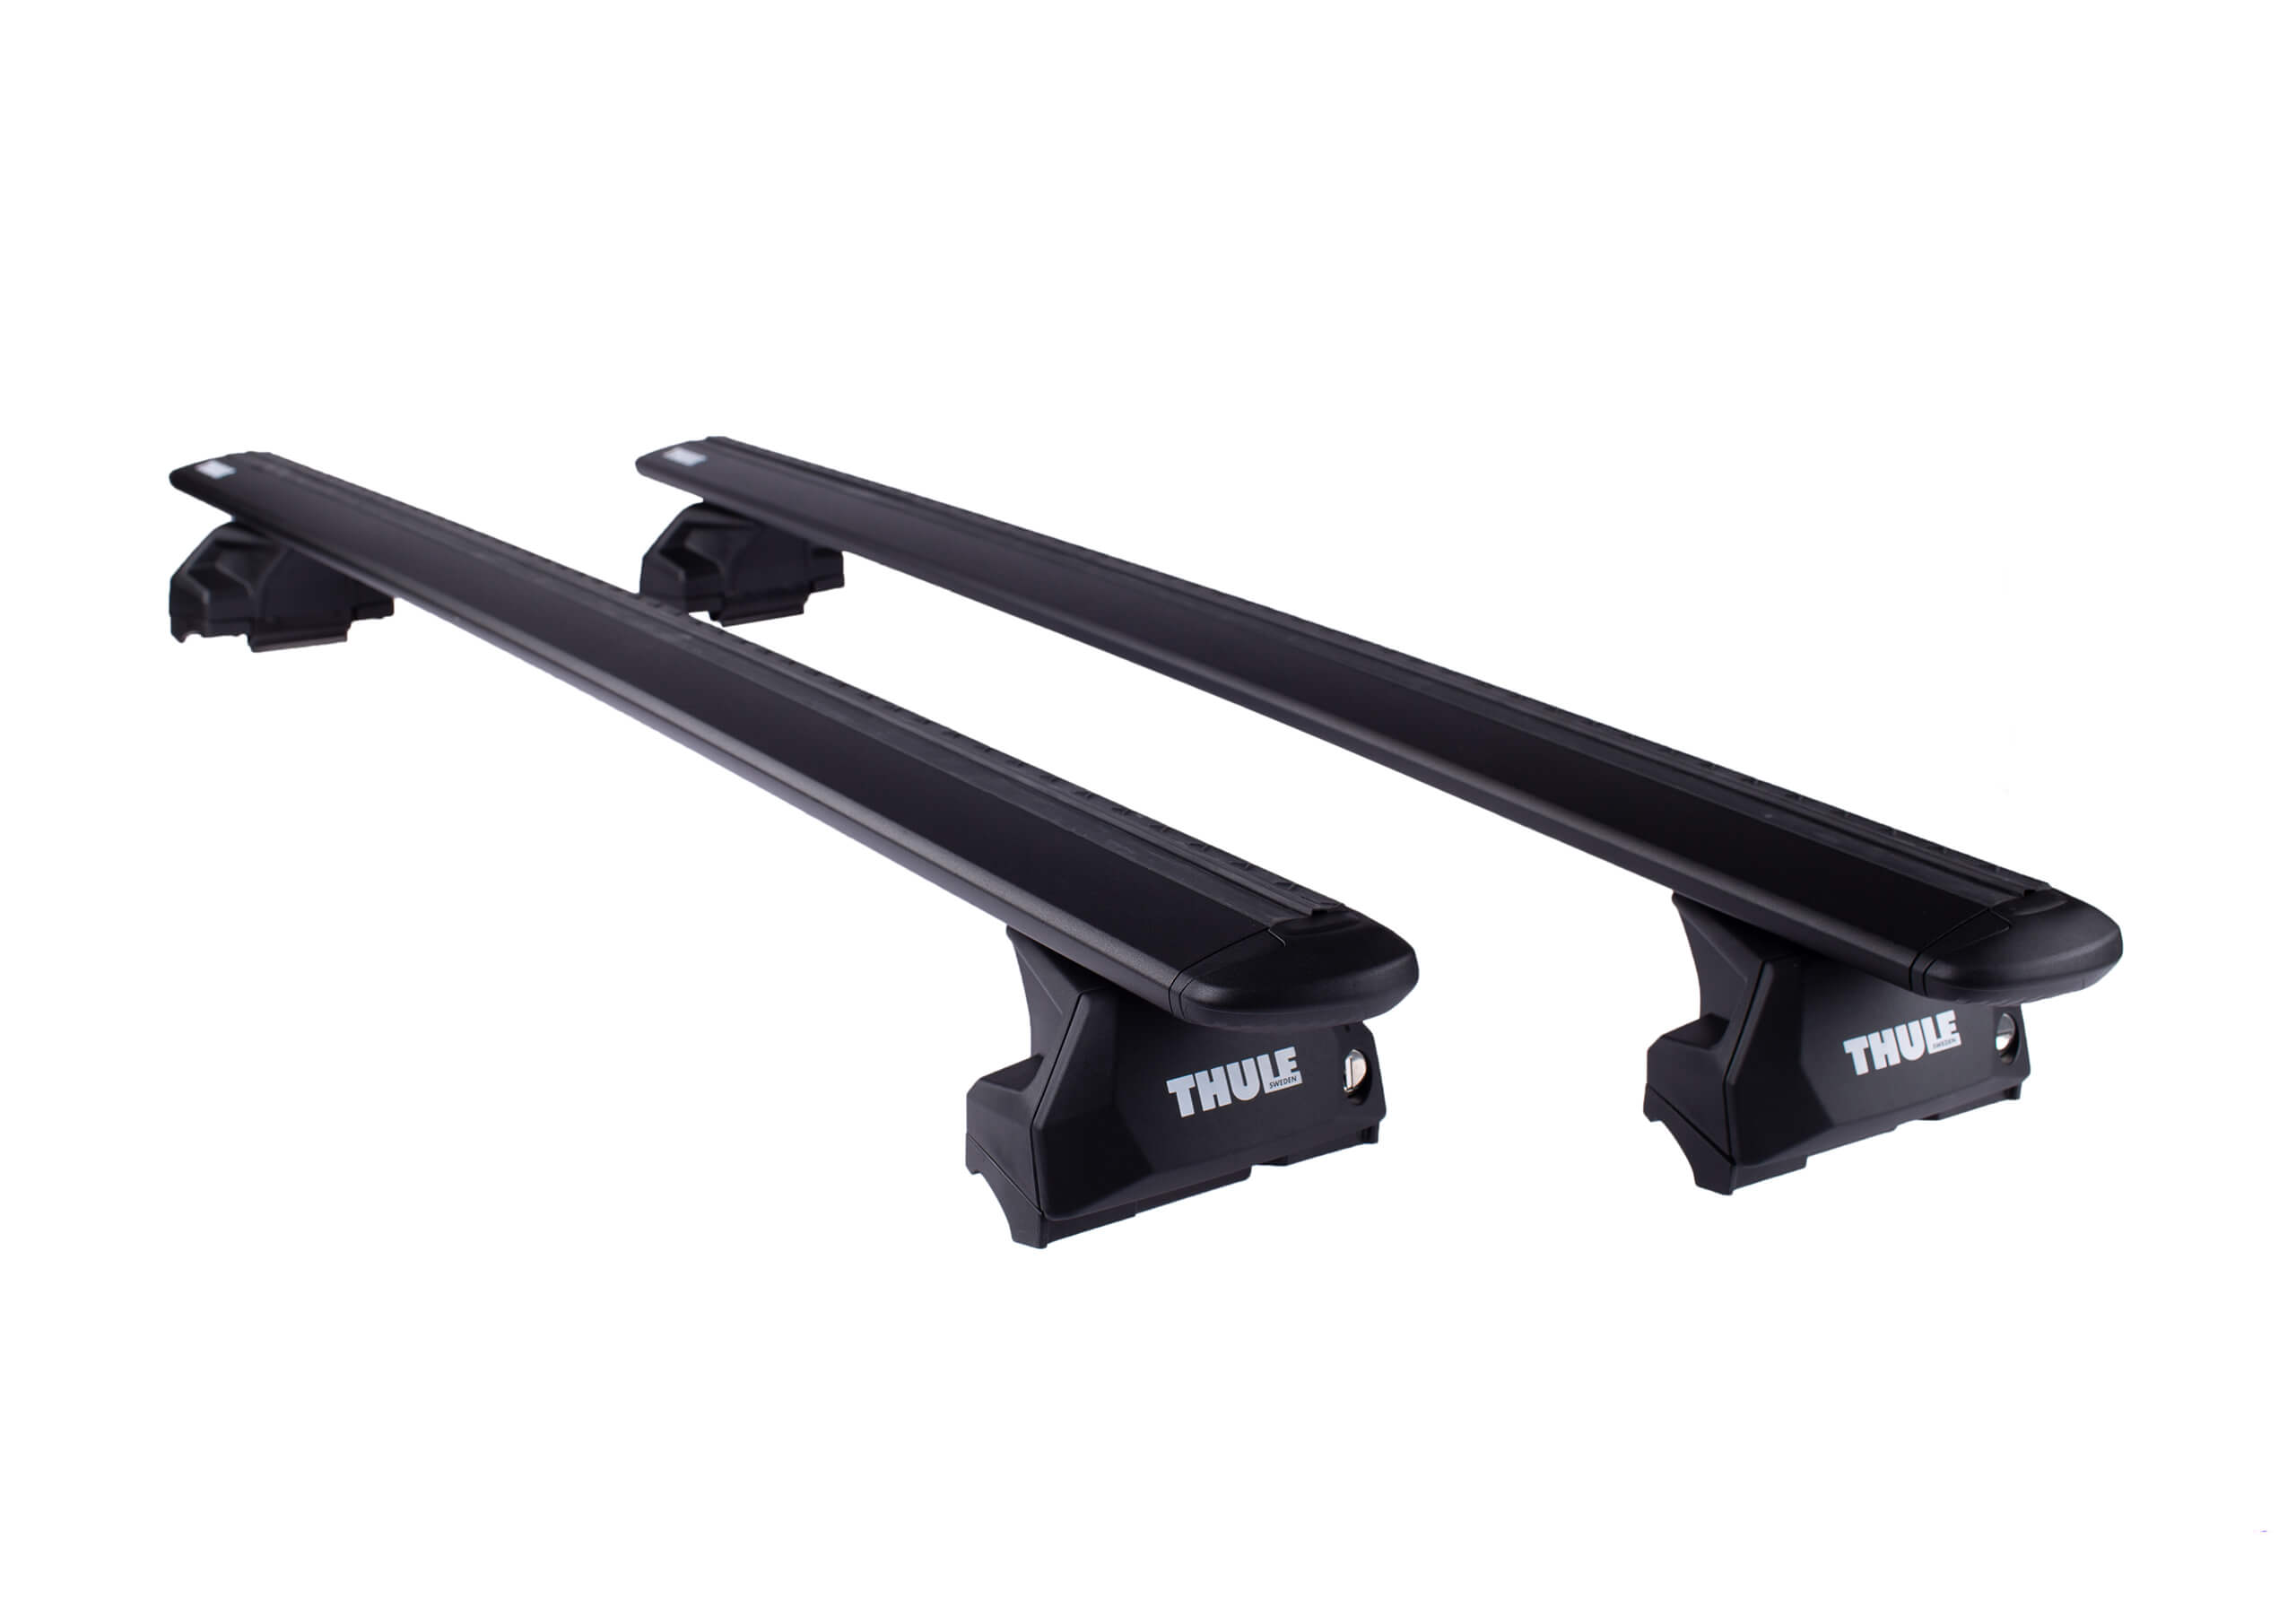 Ford Galaxy (2010 to 2015):Thule black WingBars package - 7106, 7113B, 6032